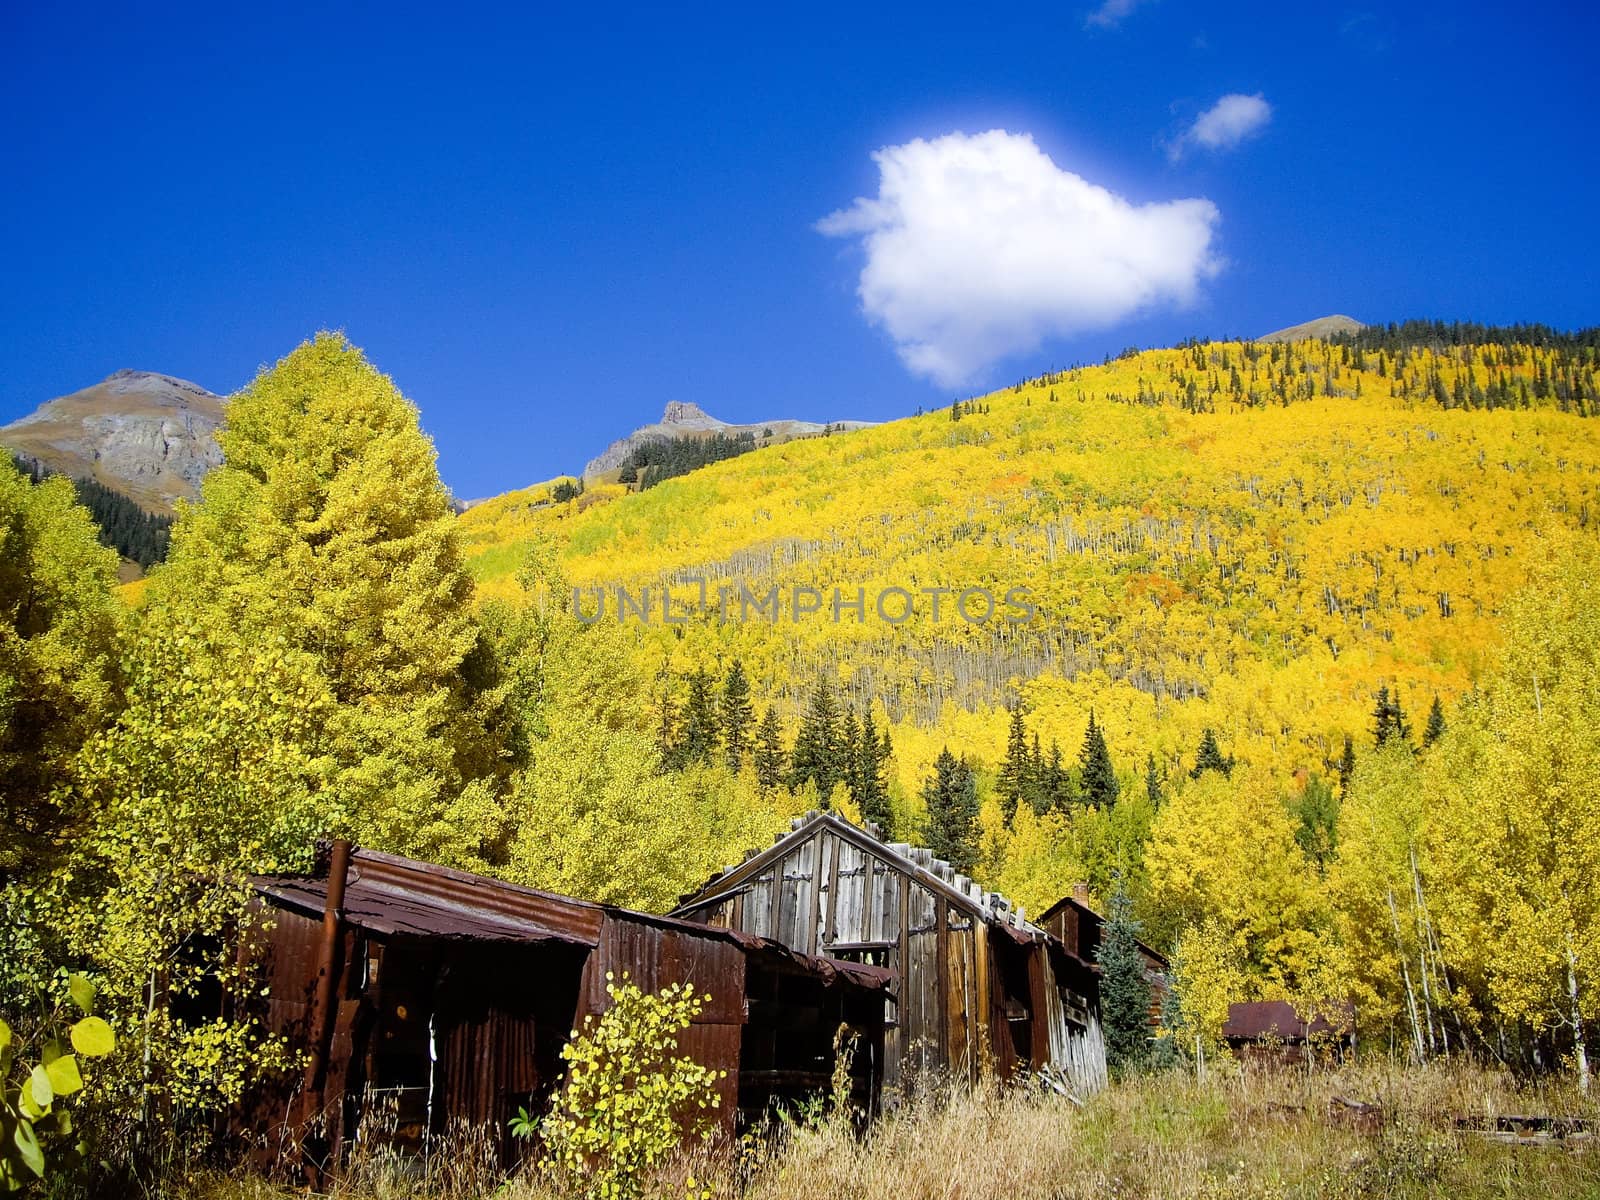 Ruins of Colorado Silver Mining community in Fall by emattil